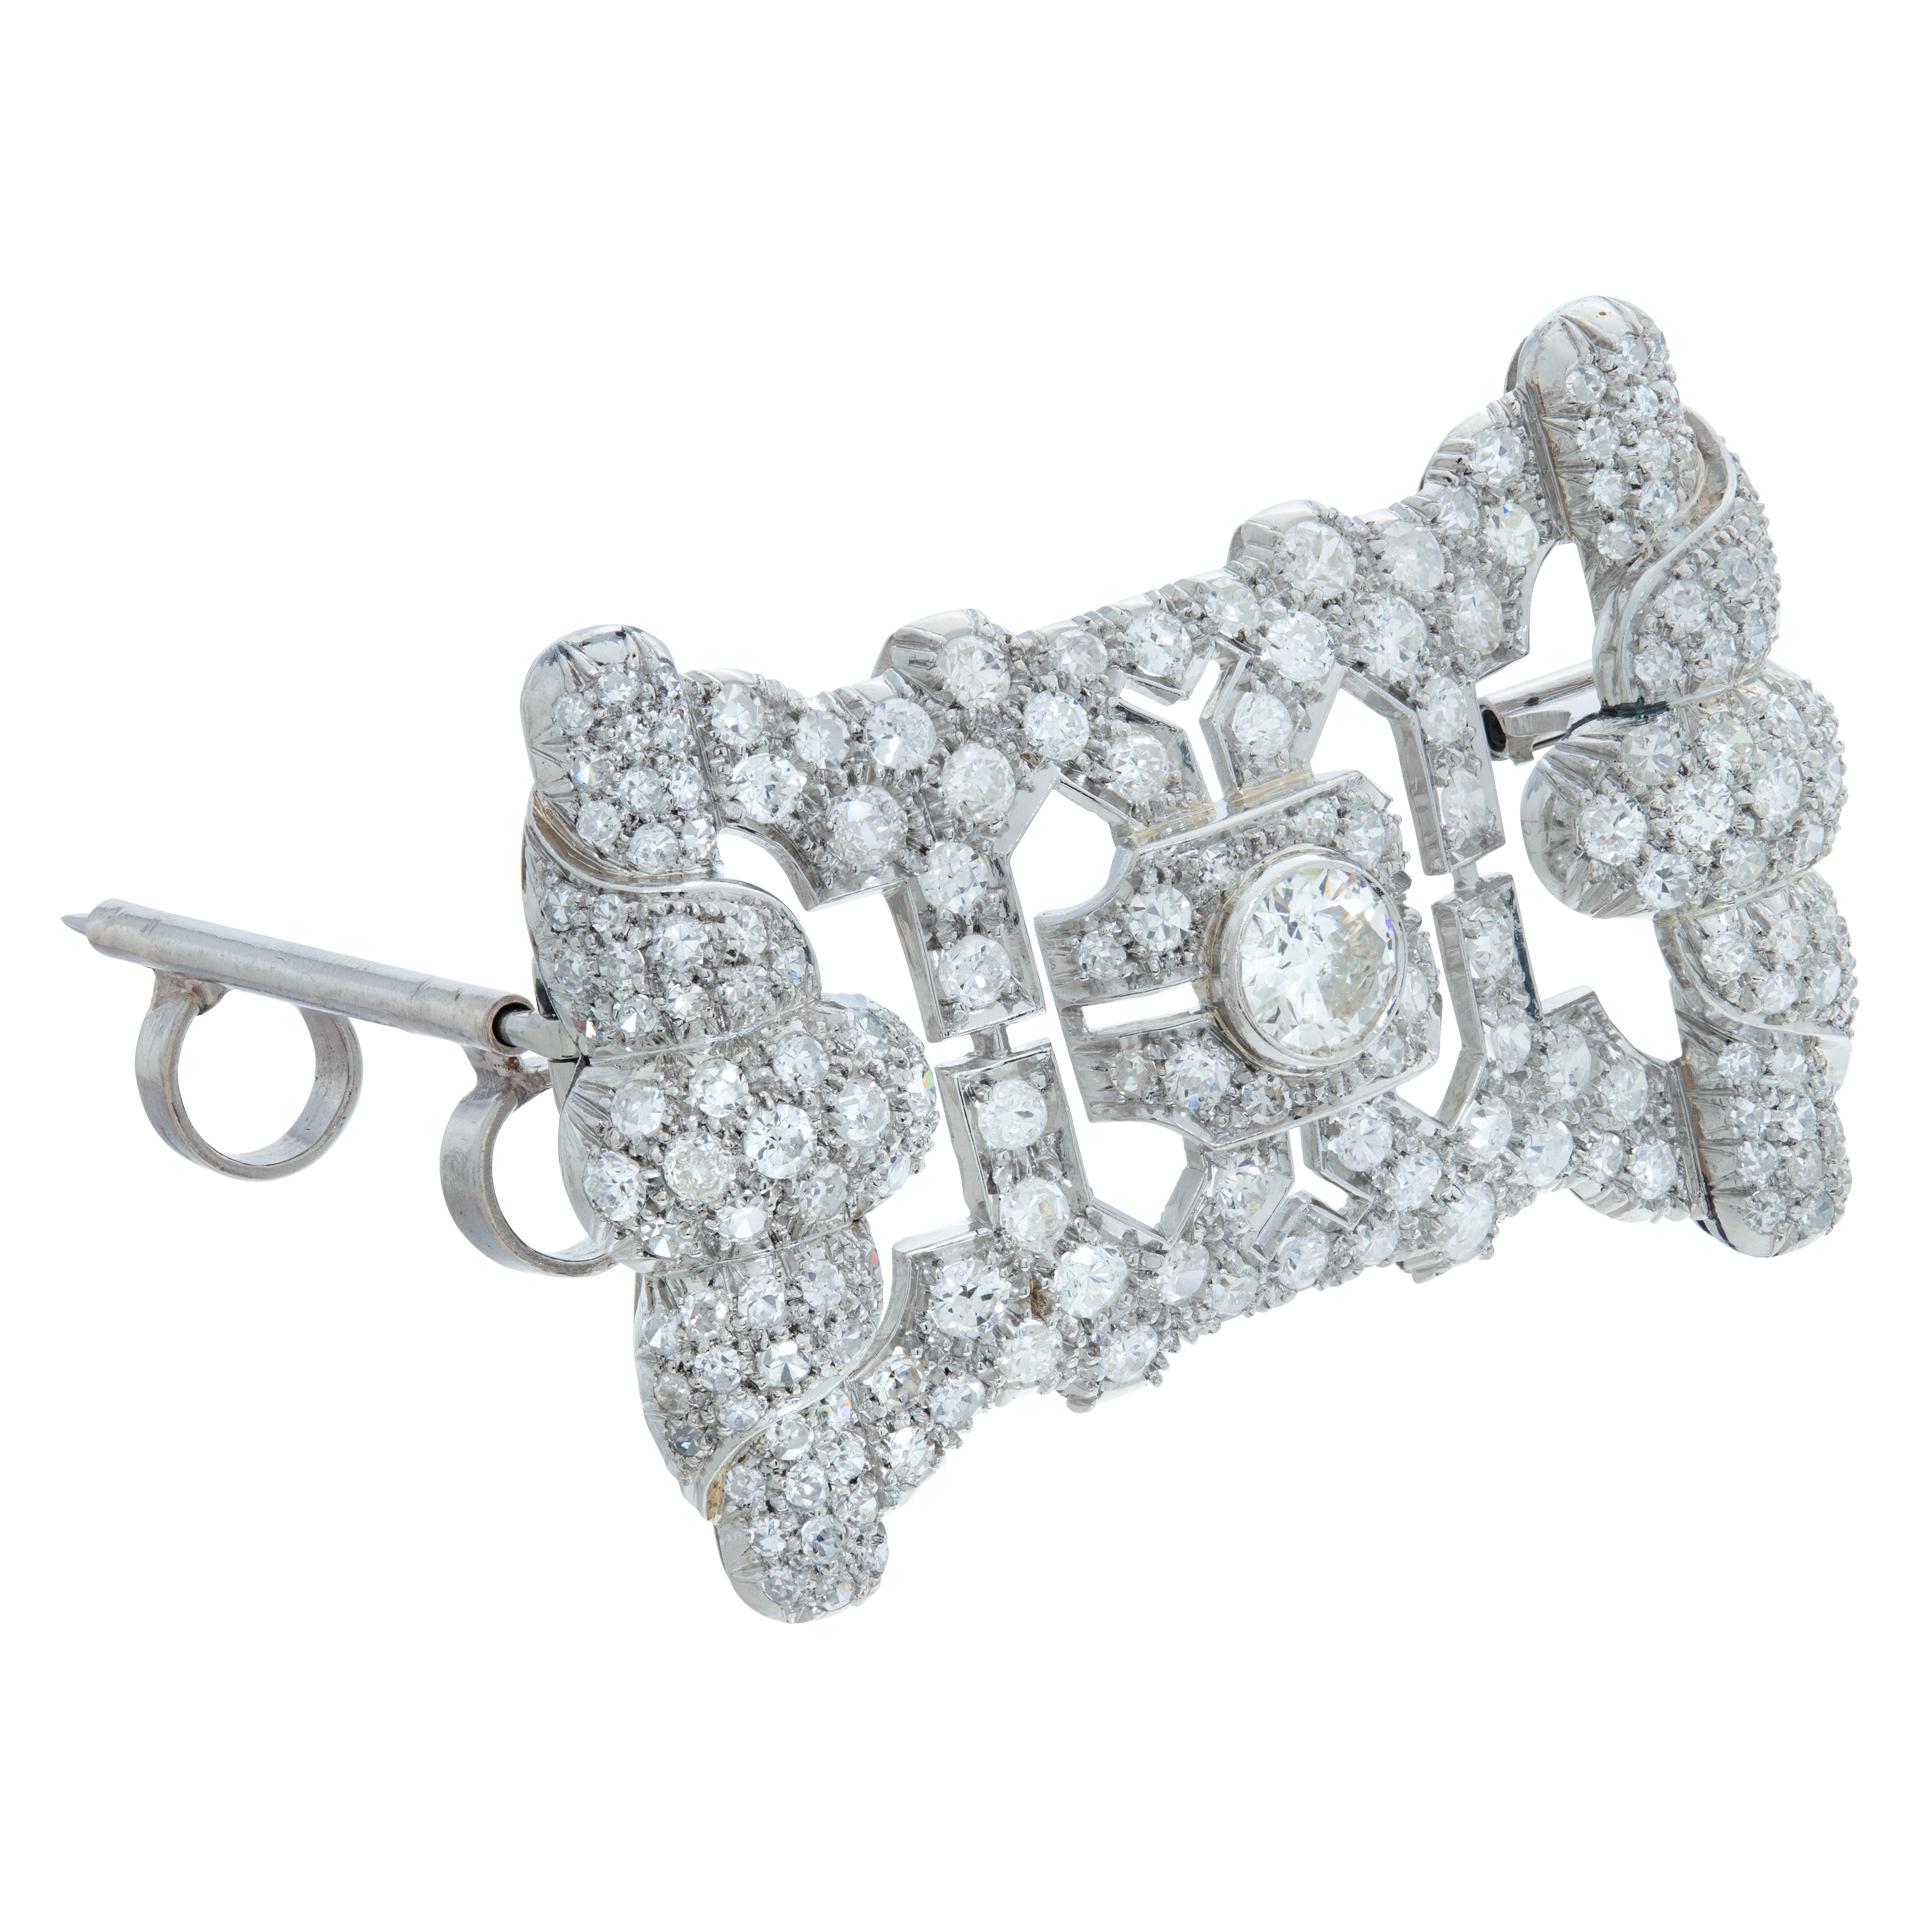 Art Deco & European cut diamonds brooch/pendant in platinum. Total diamonds approx. weight: 5.80 carats, white and eye clean. Measurements:  1.75 inches x 1.25 inches